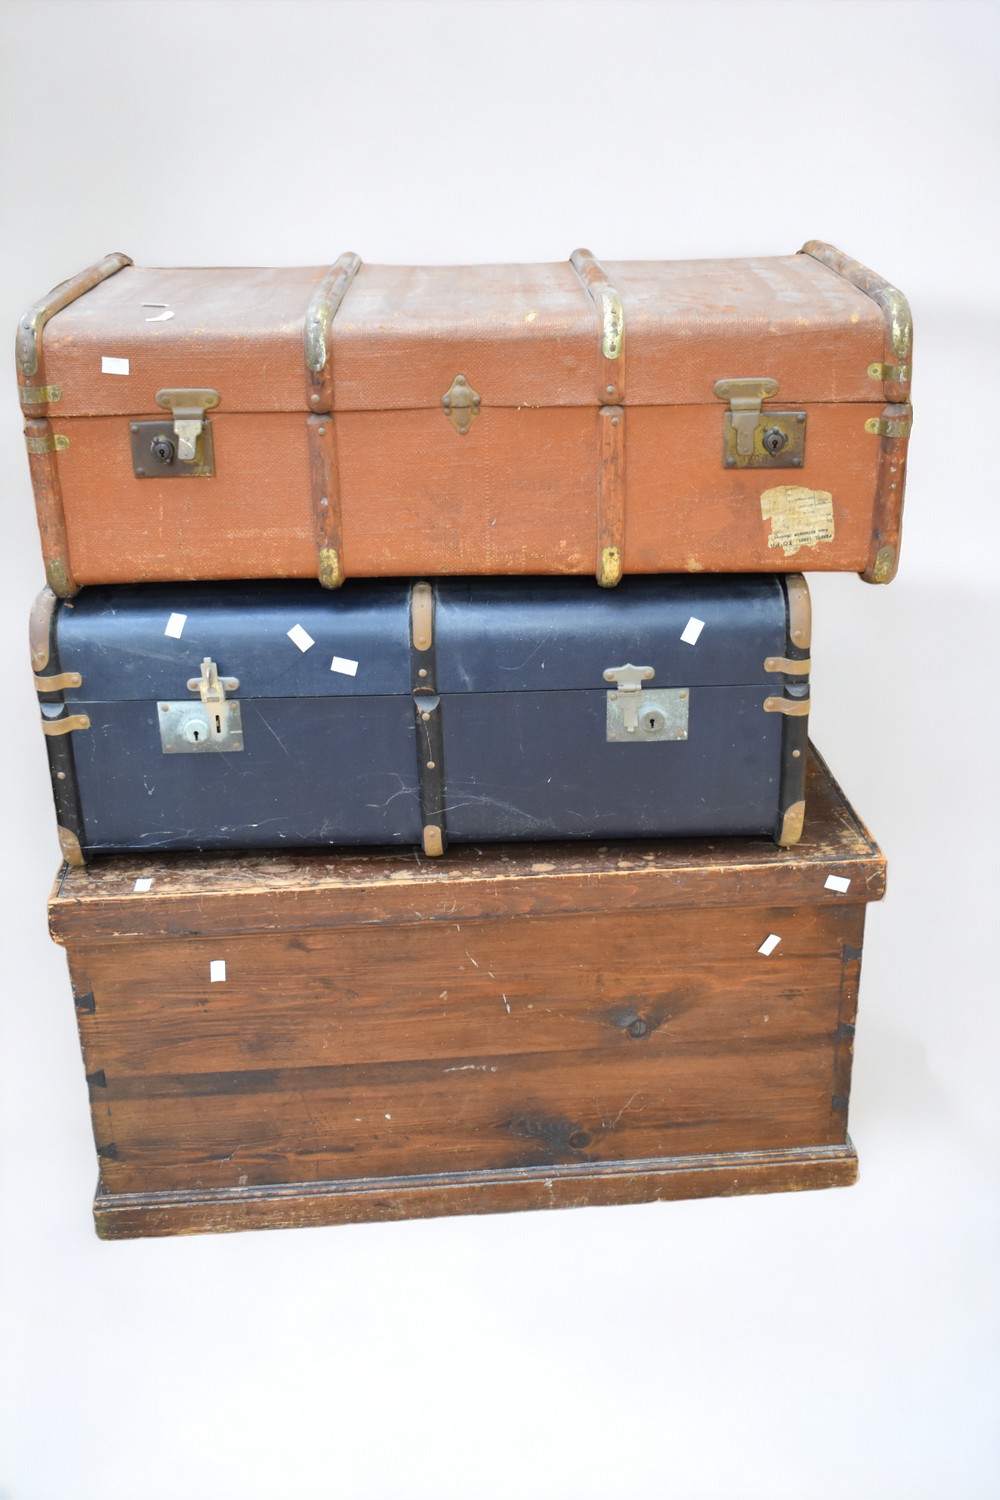 A Victorian chest circa 1850 along with two 1920s travel trunks.